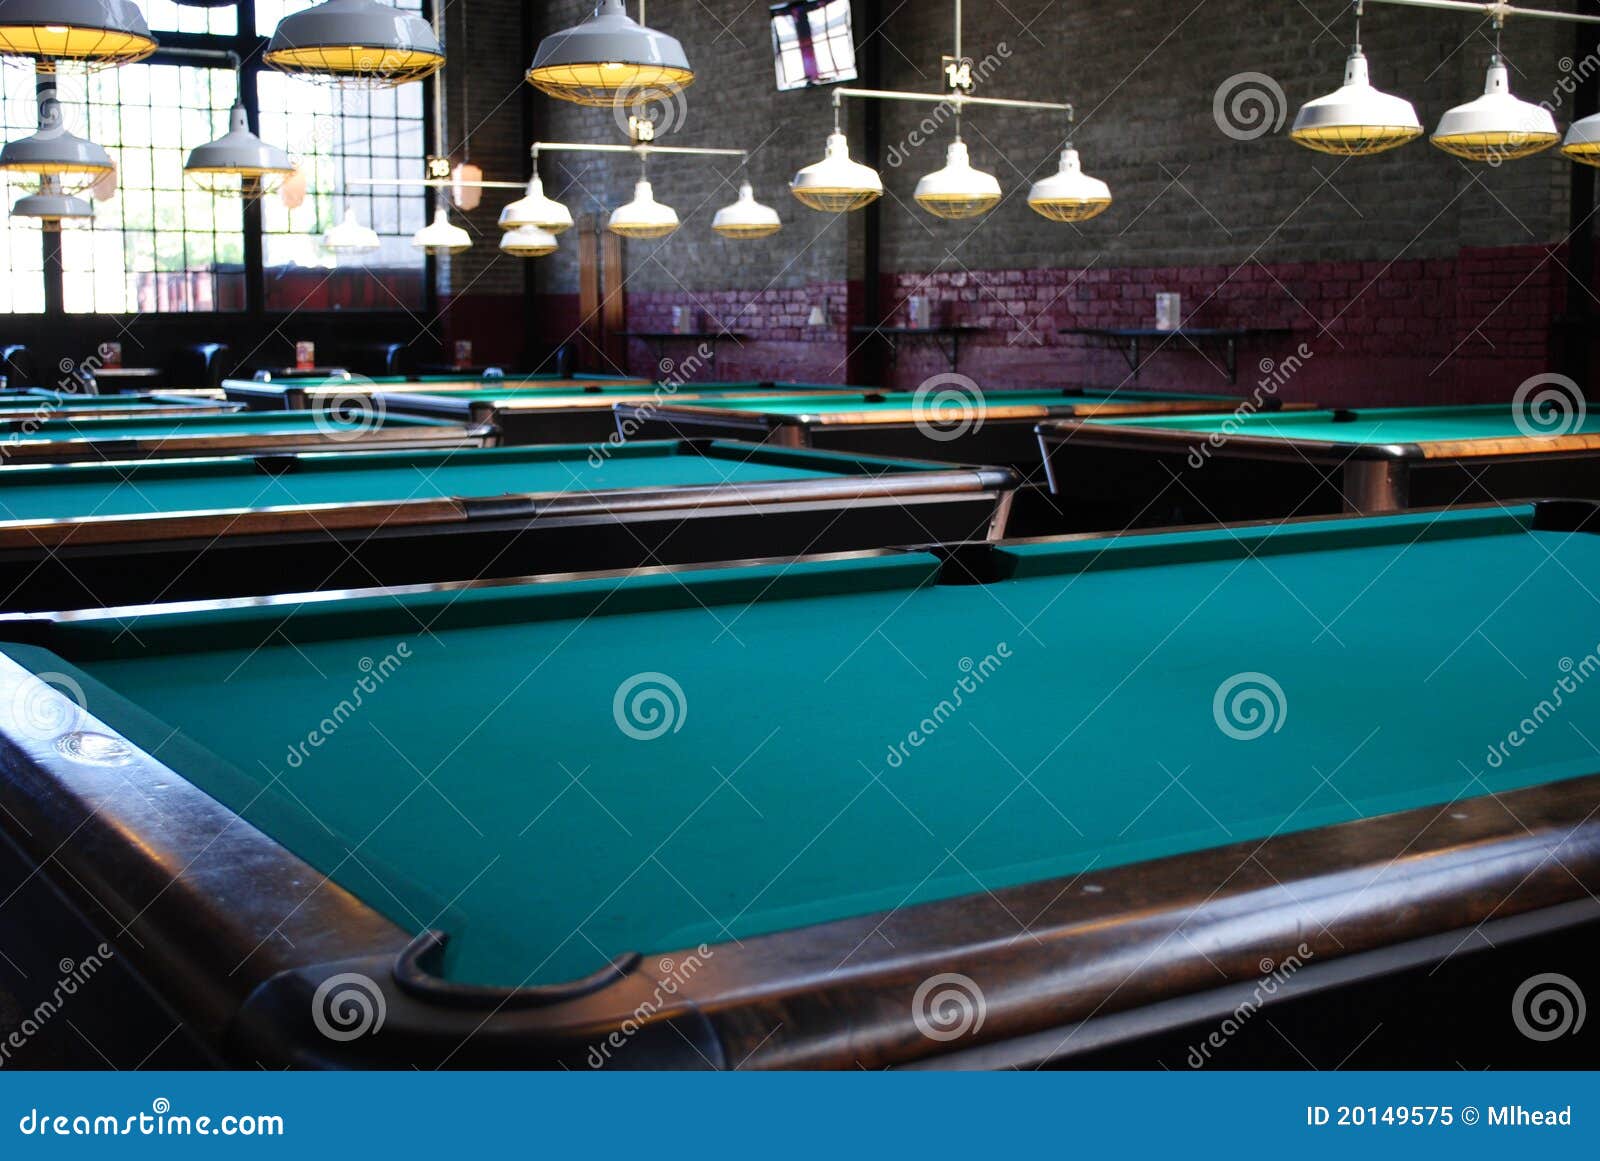 Dreaming about owning your own pool hall, but struggle with making it a reality?